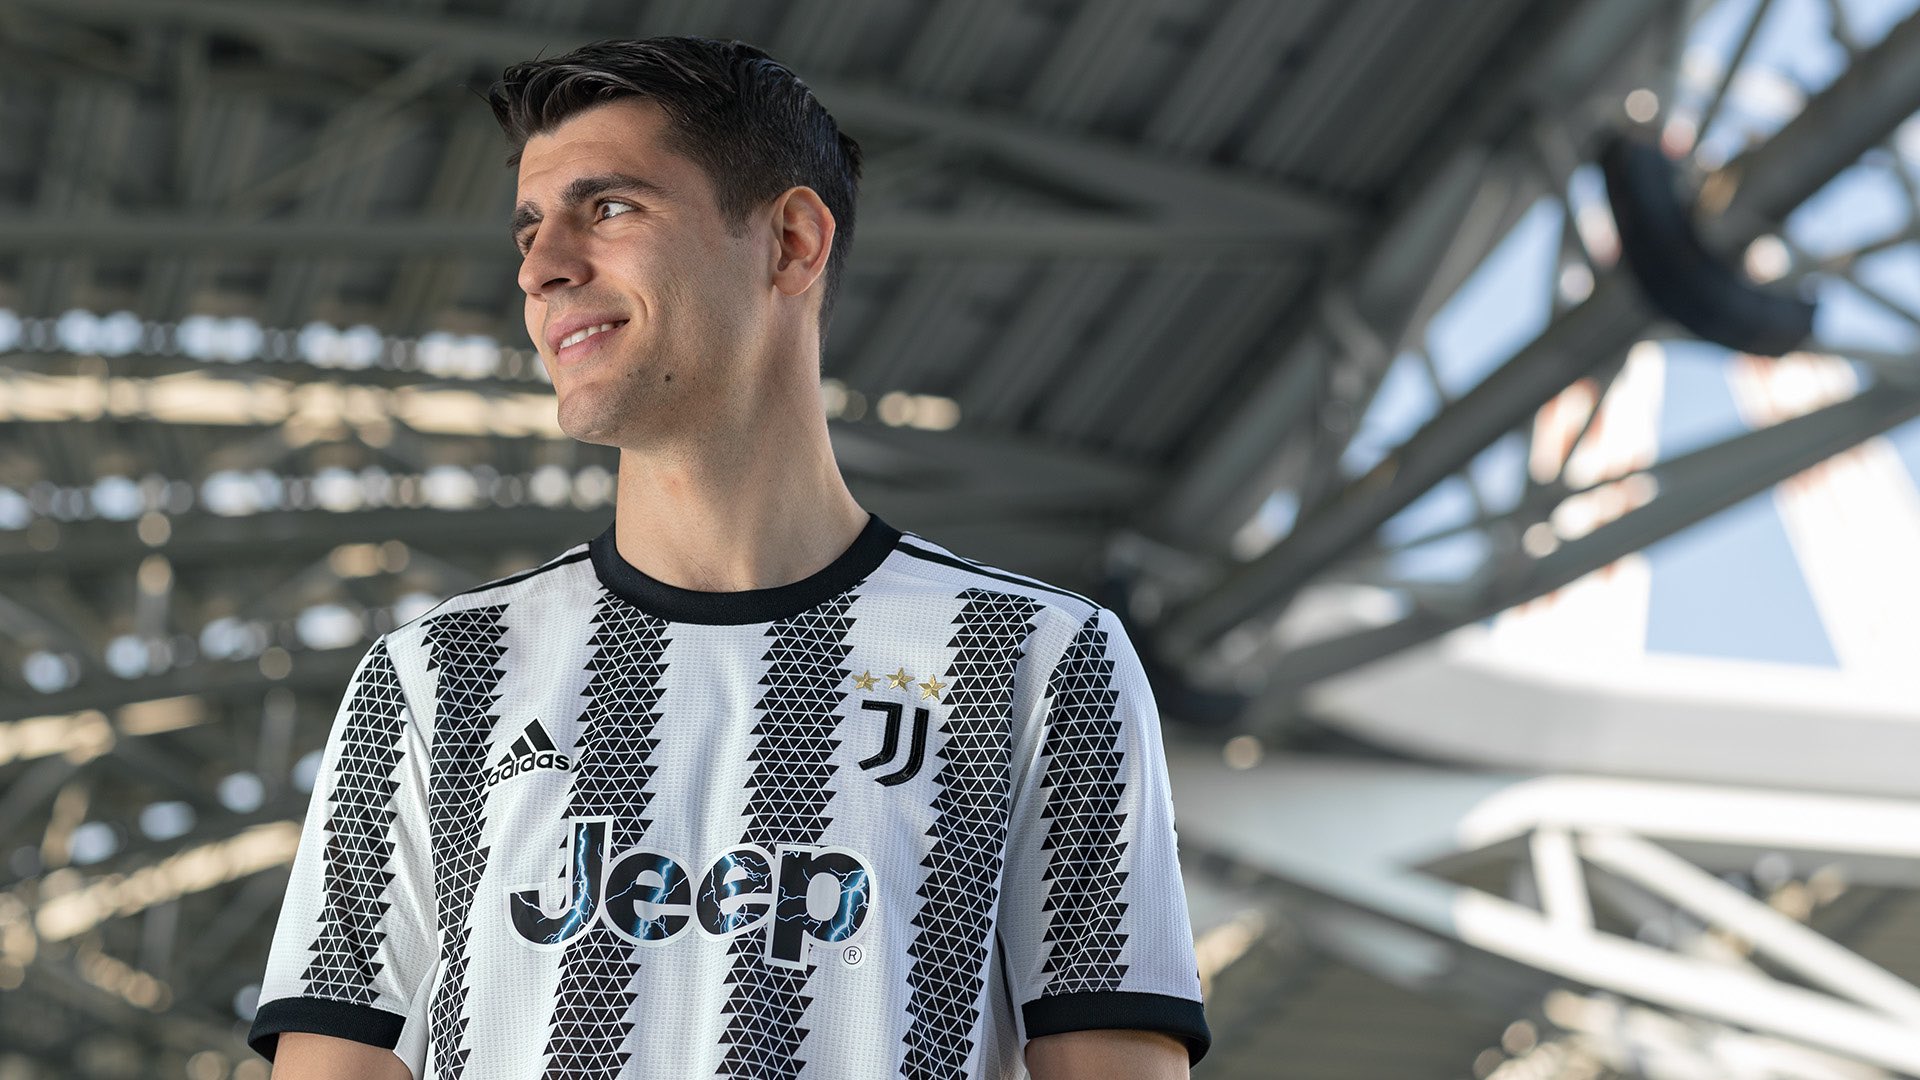 adidas on Twitter: "Inspired by the place we call home 🏟​ A new legacy begins.​ The new @juventusfc 22/23 kit, exclusively available https://t.co/irlHRE6TJN, club stores and selected partners. https://t.co/jA5bNaysWC" /